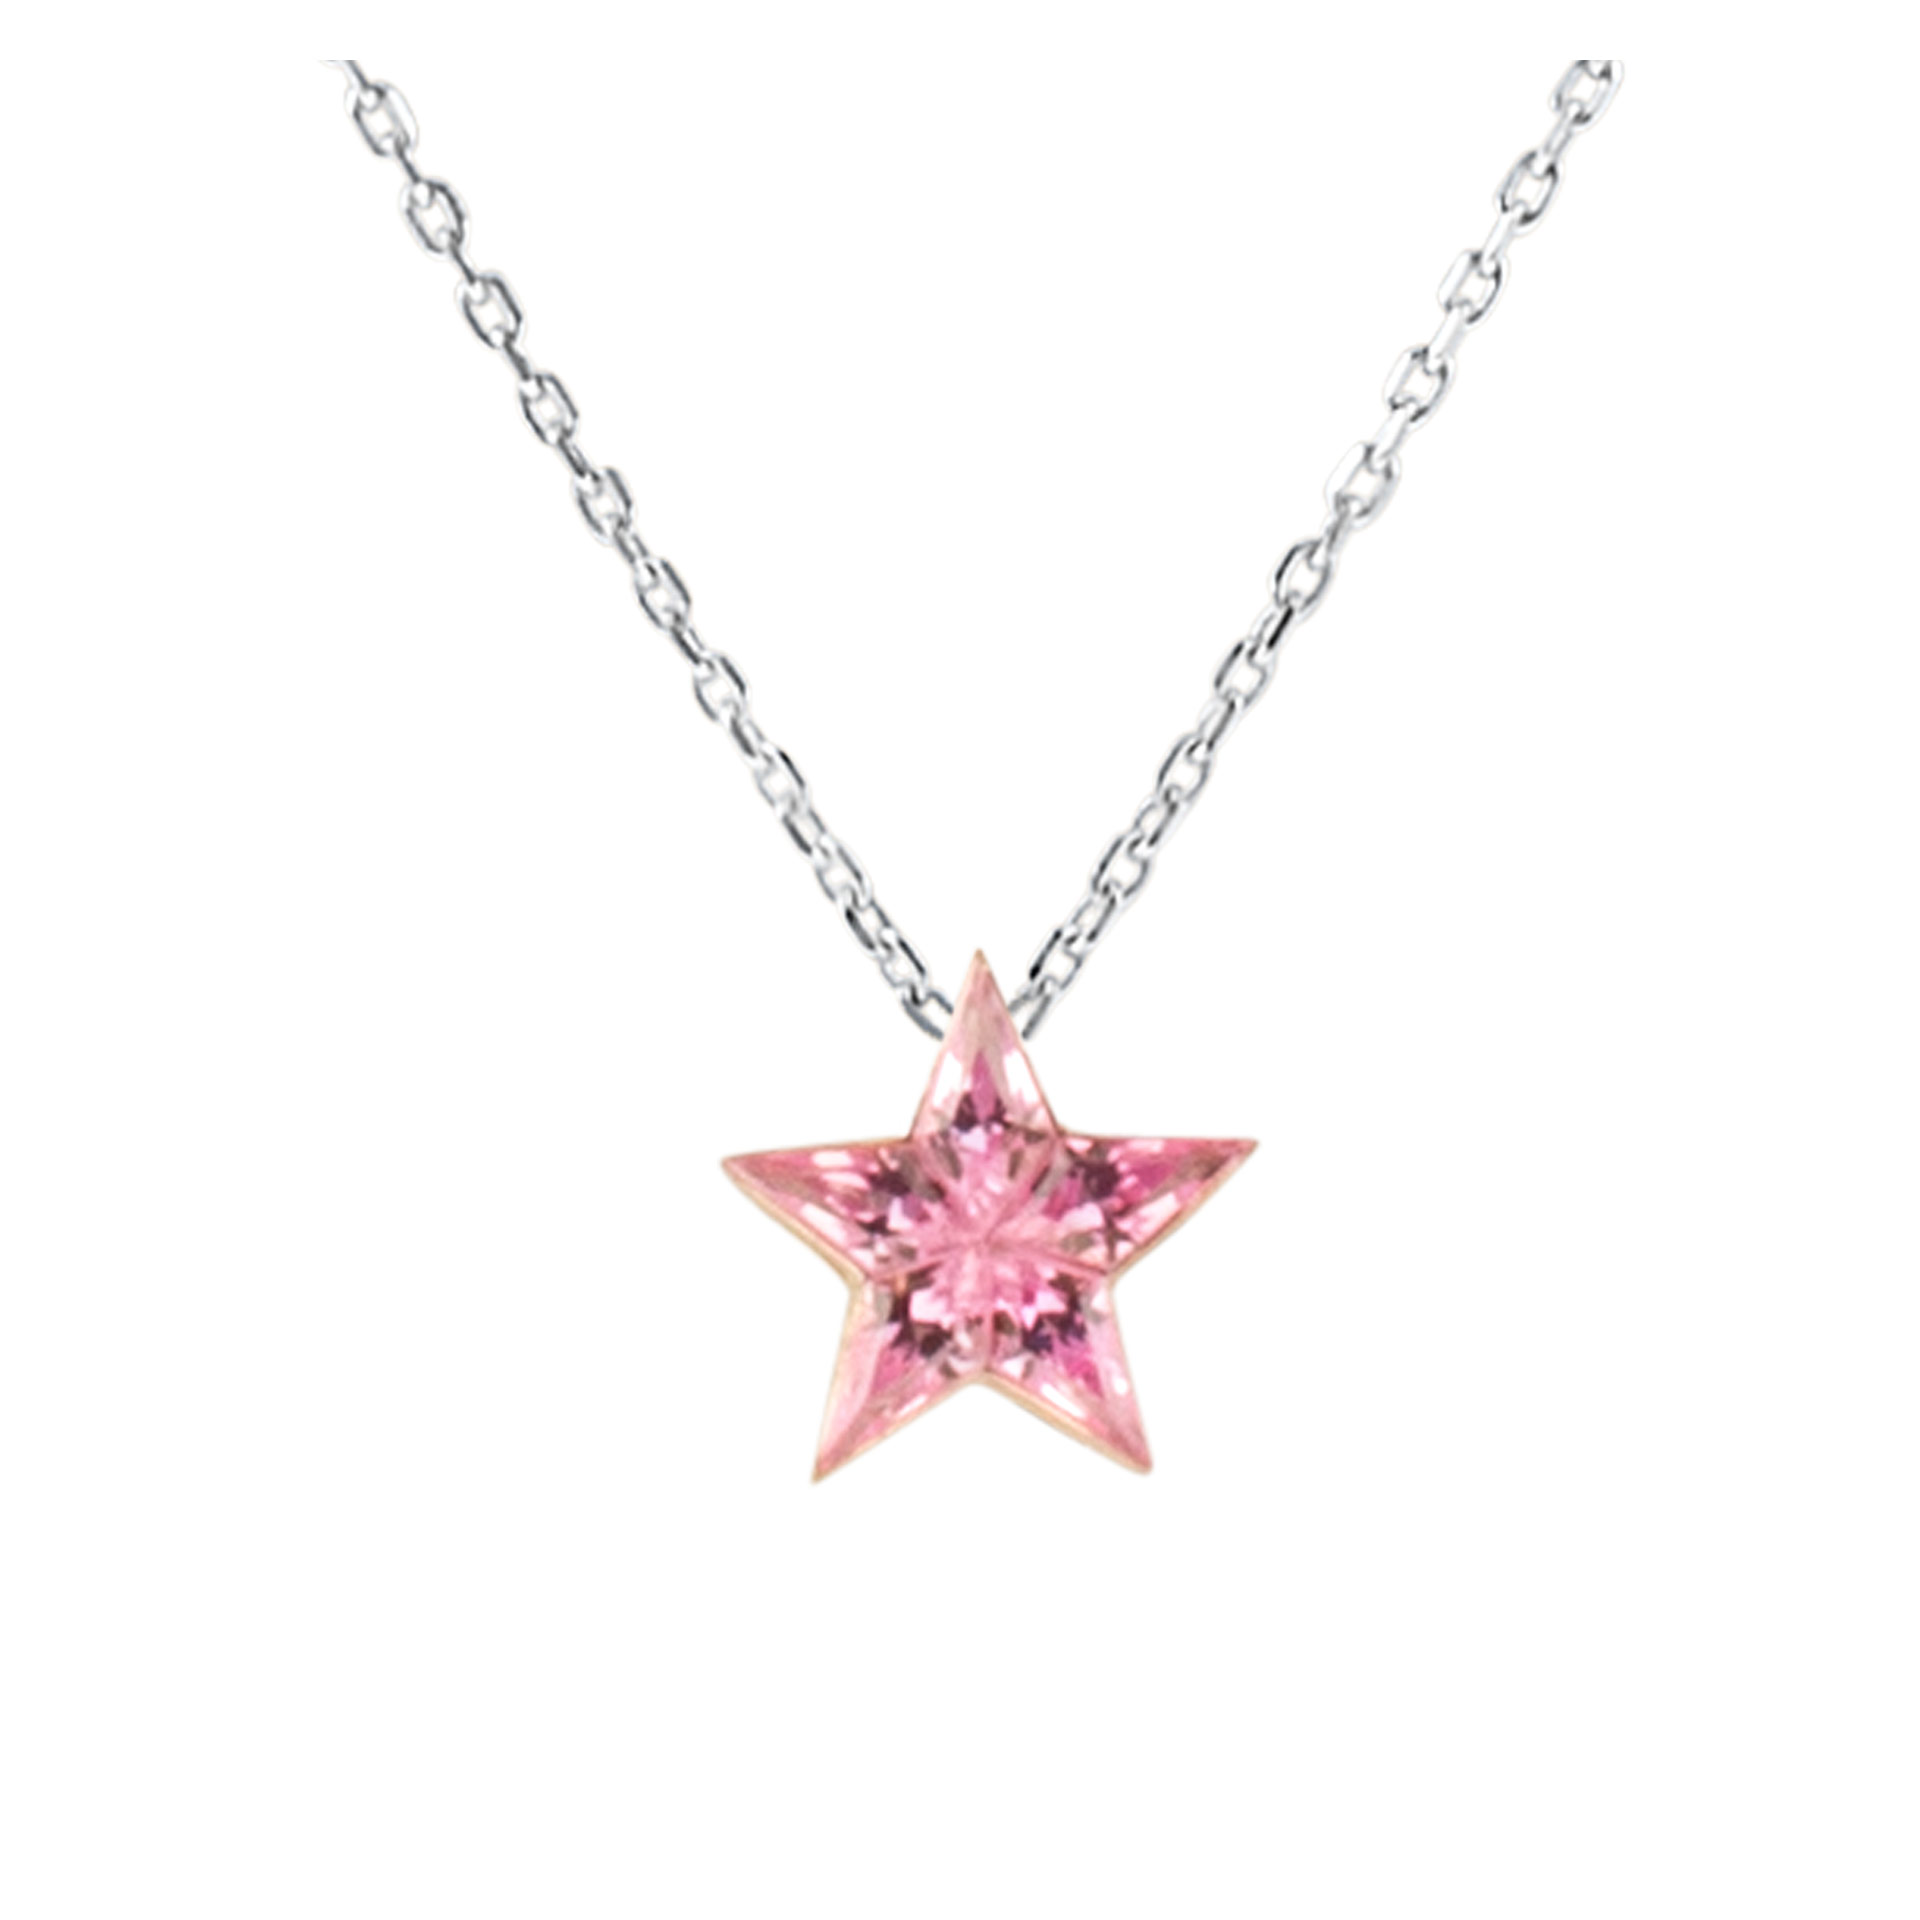 Pink sapphire star necklace in 18K white gold